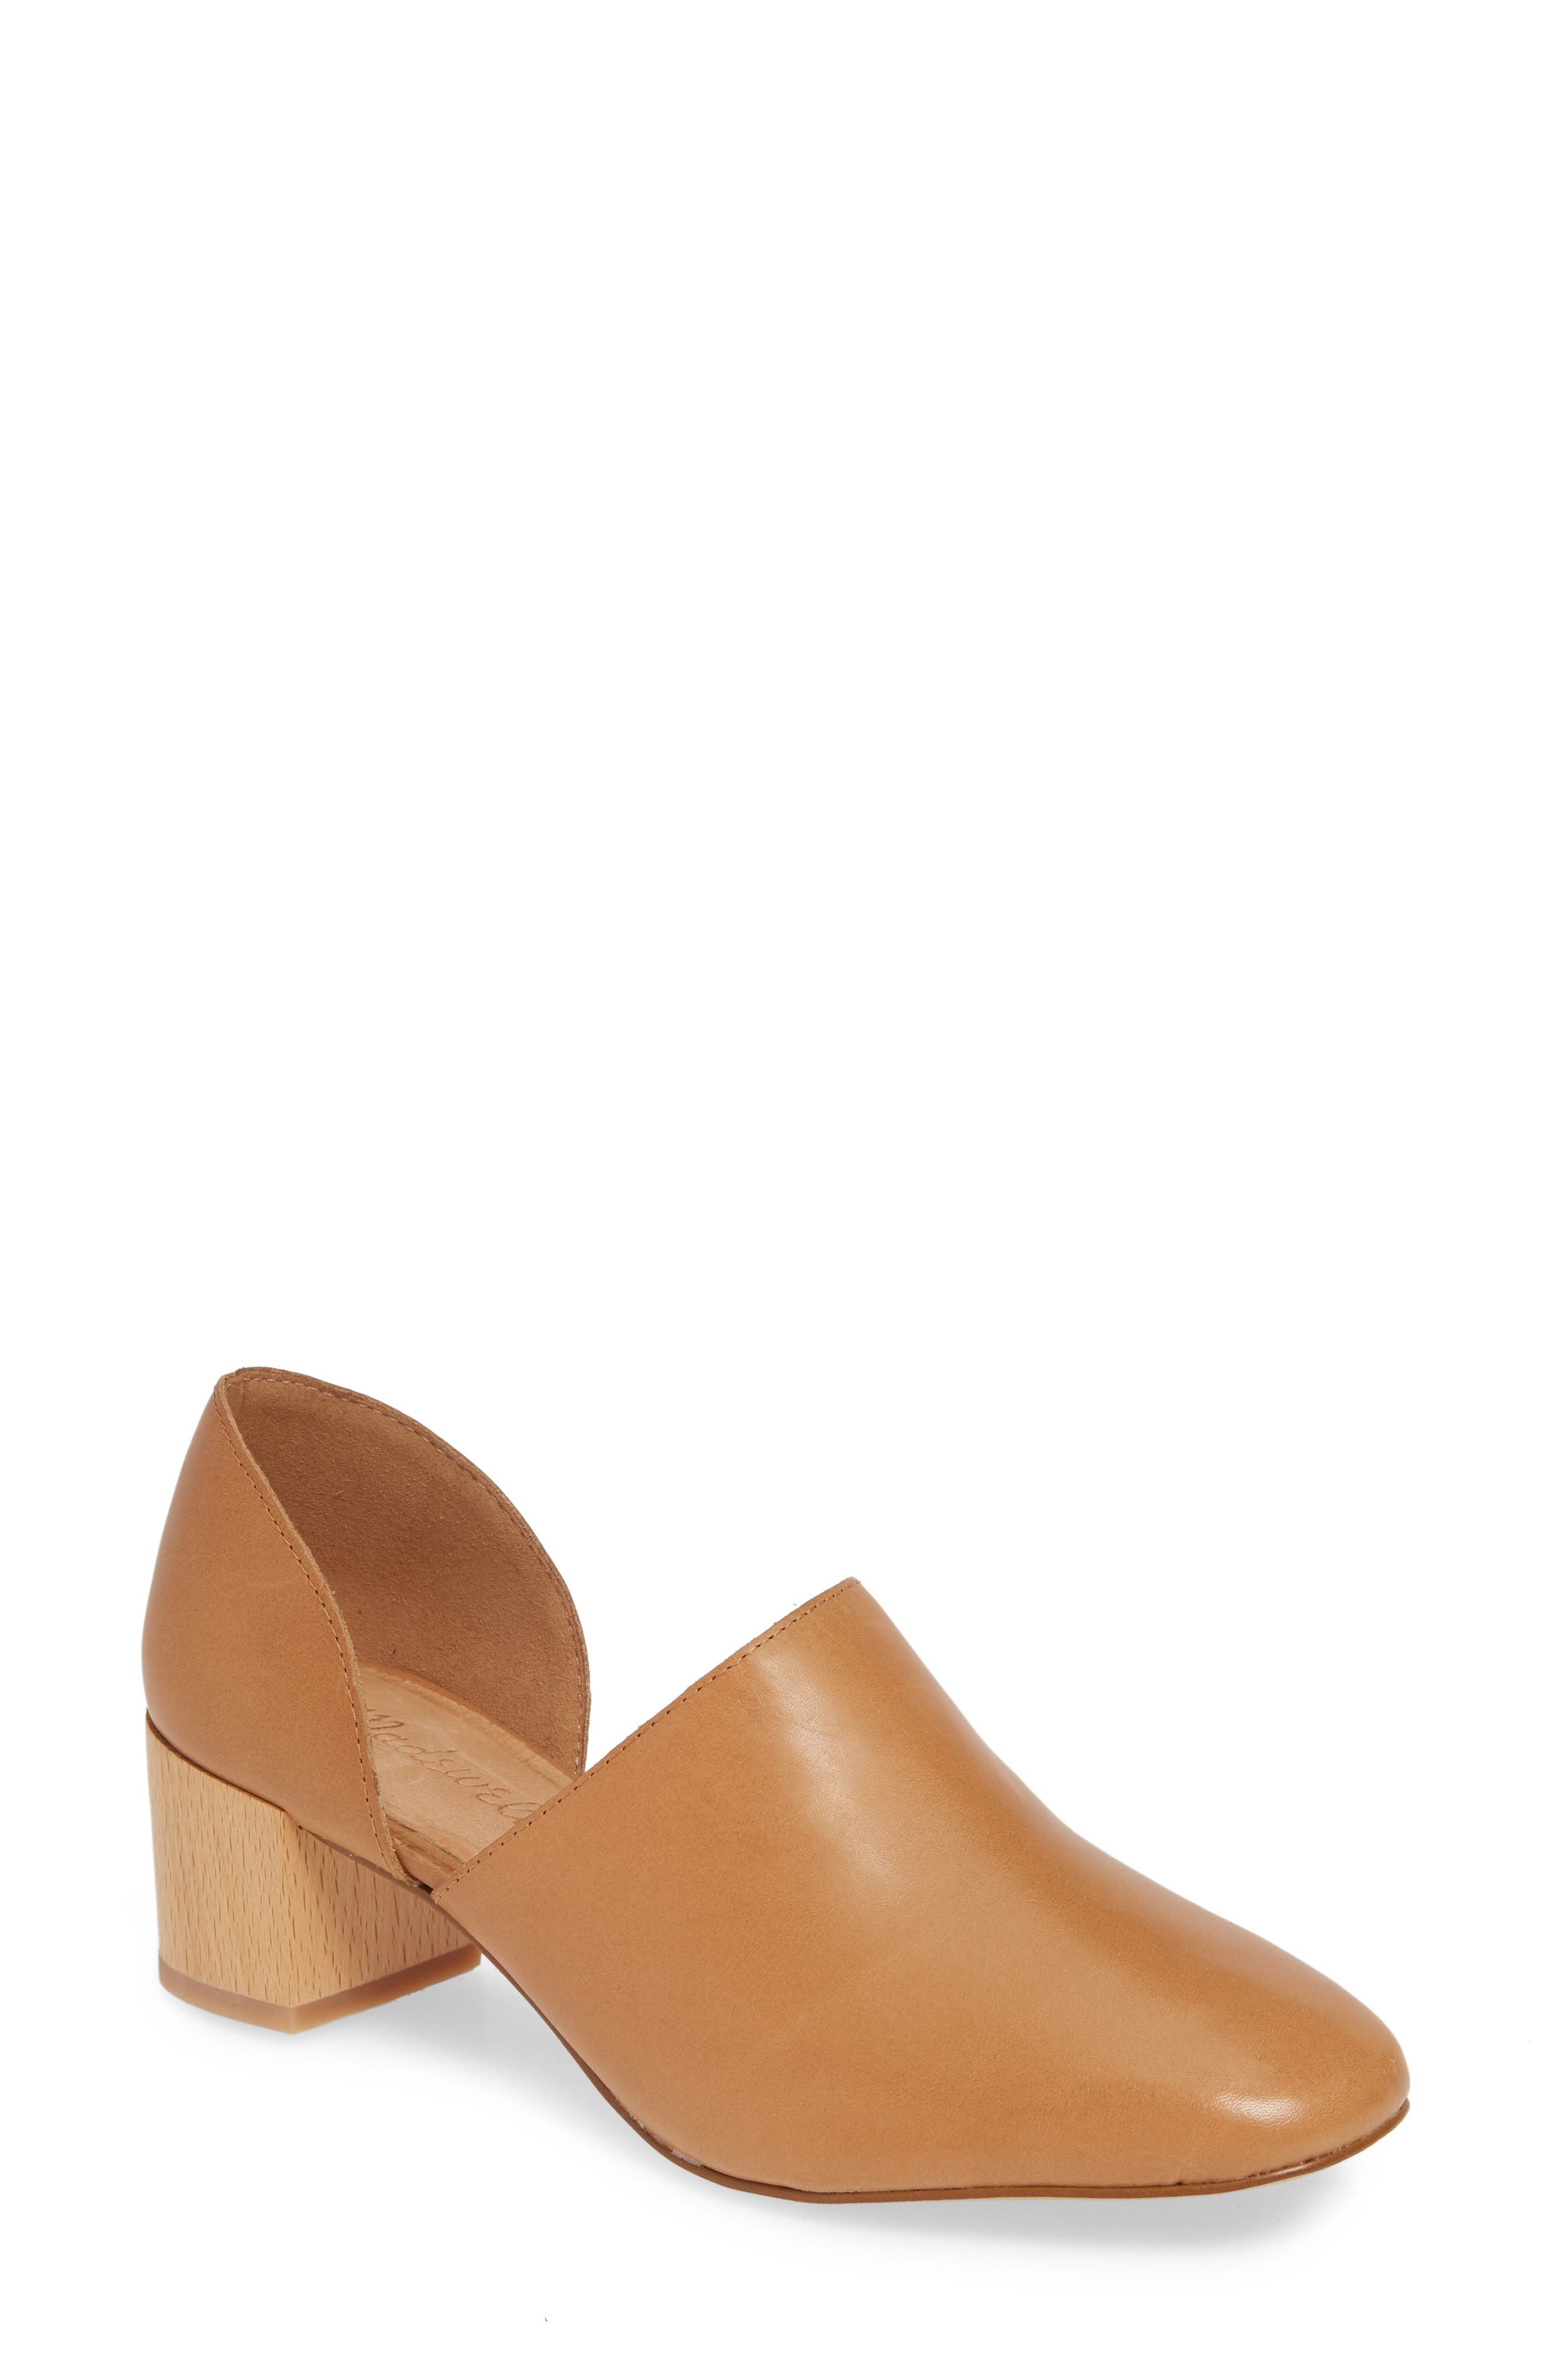 Madewell | The Kirstie d'Orsay Bootie 